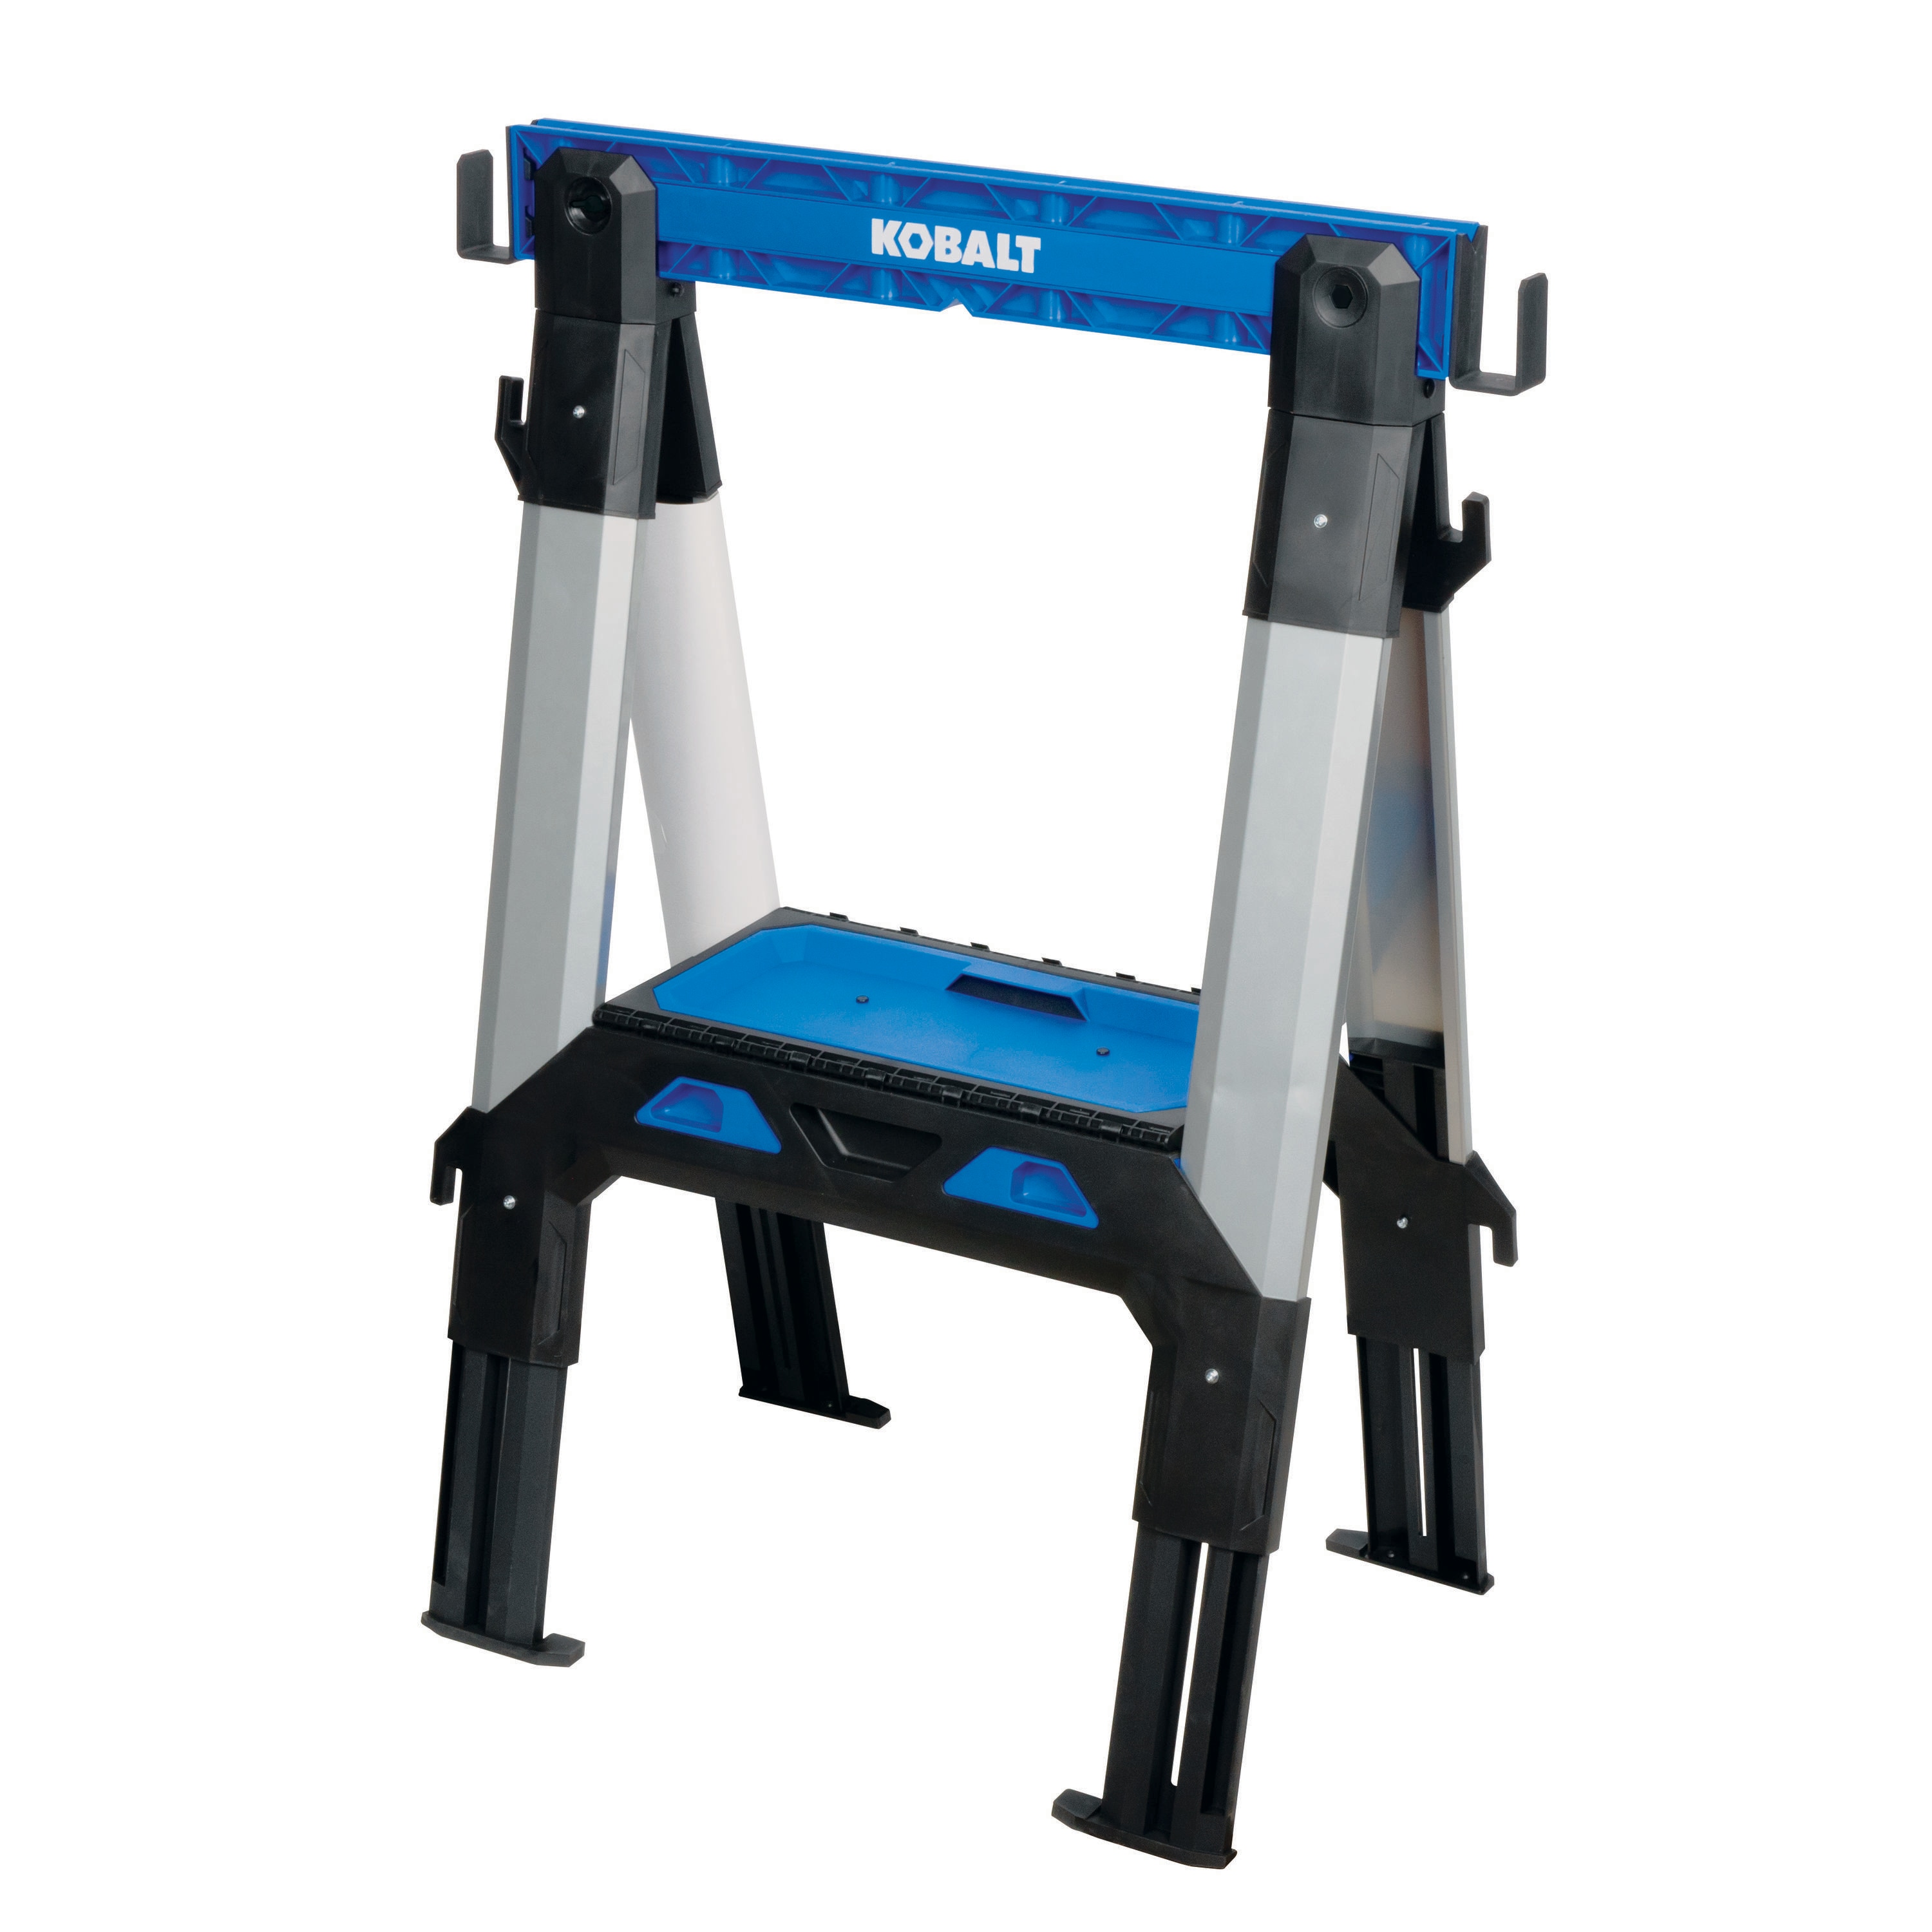 4-in-1 Work Top 30.75-in W x 33.86-in H Adjustable Polypropylene and Steel Construction Saw Horse (1100-lb Capacity) | - Kobalt 81759